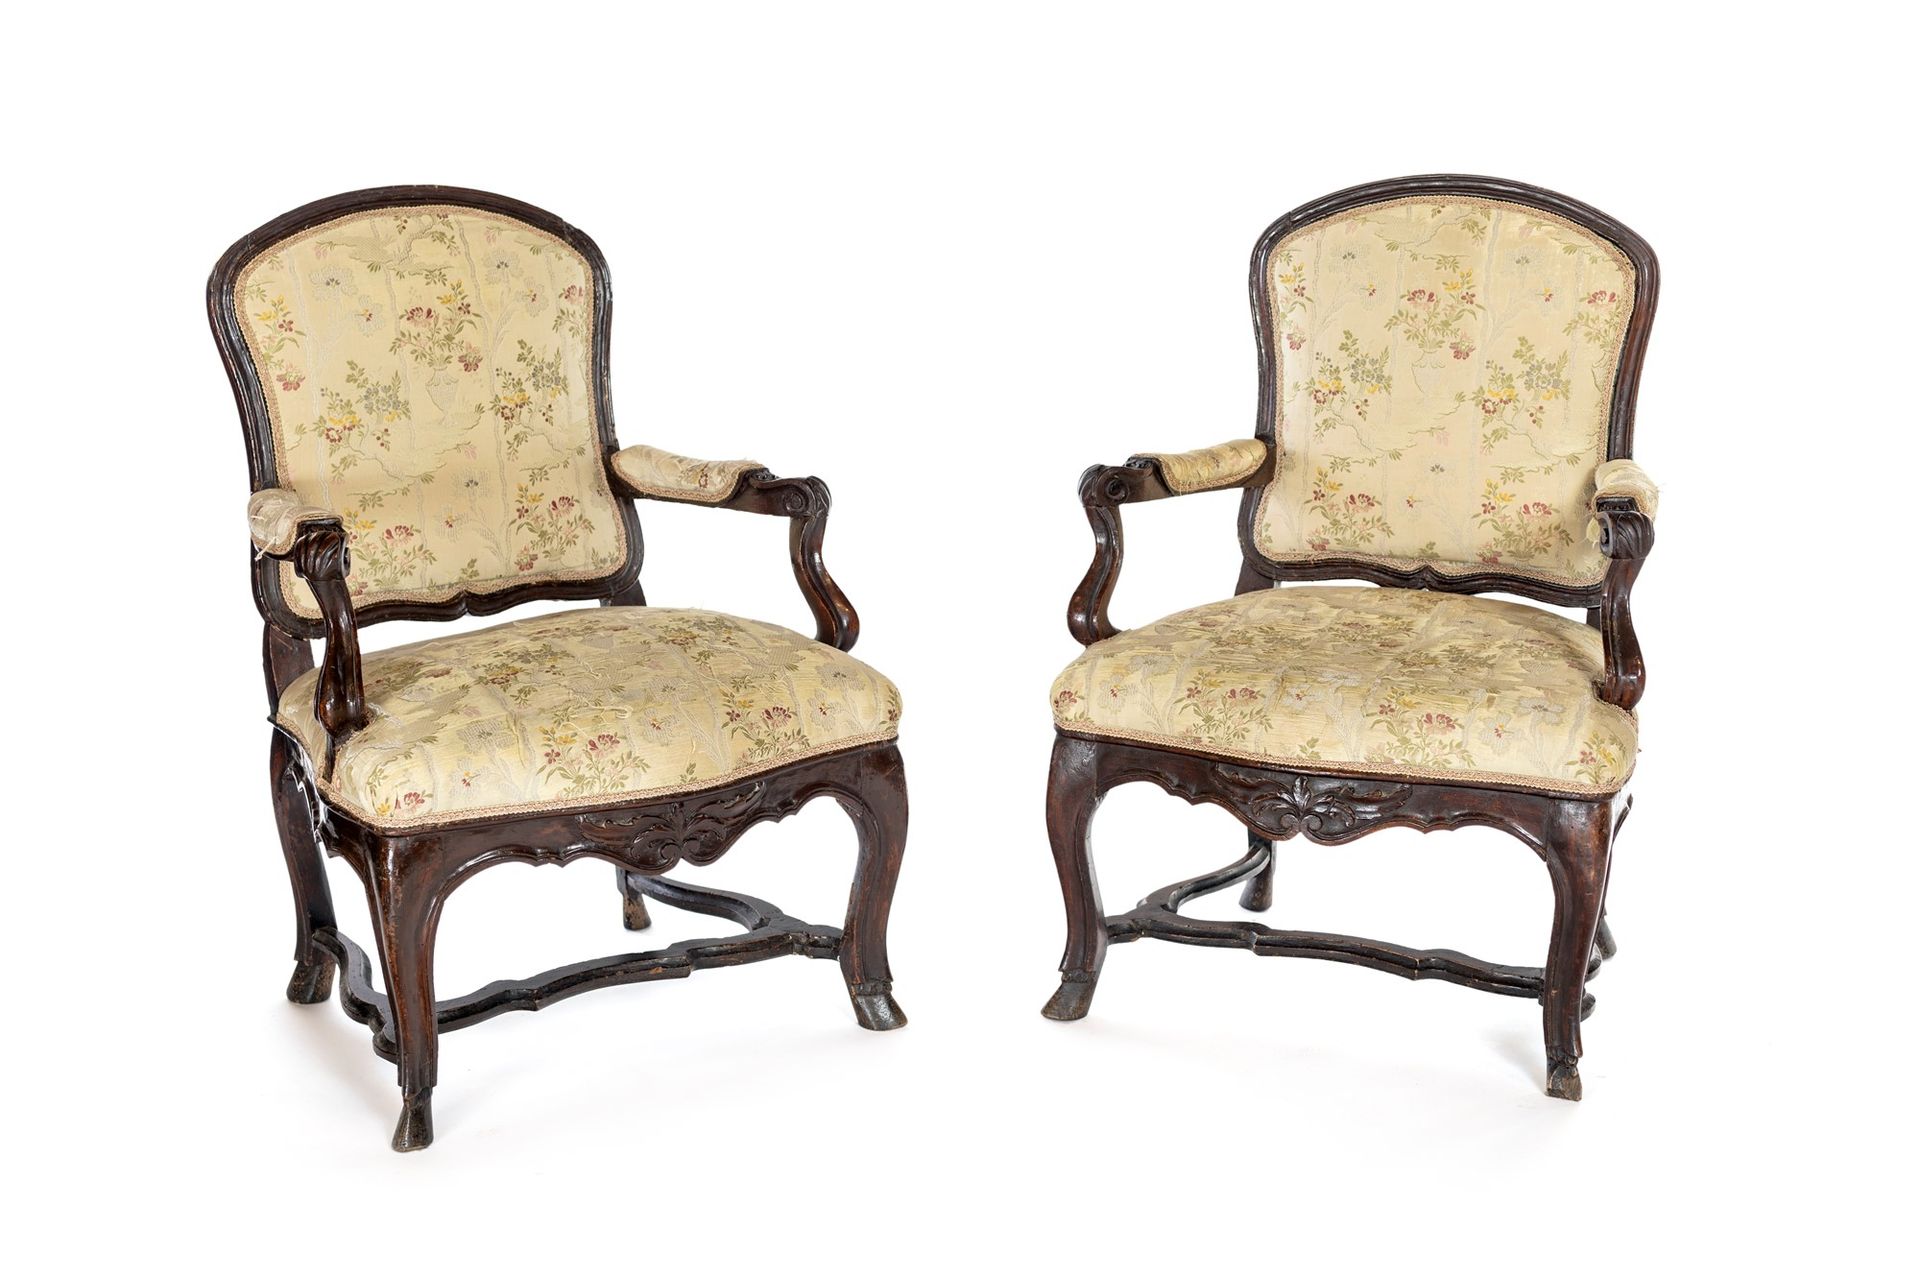 Pair of walnut armchairs, first half of the 18th century avec des cadres façonné&hellip;